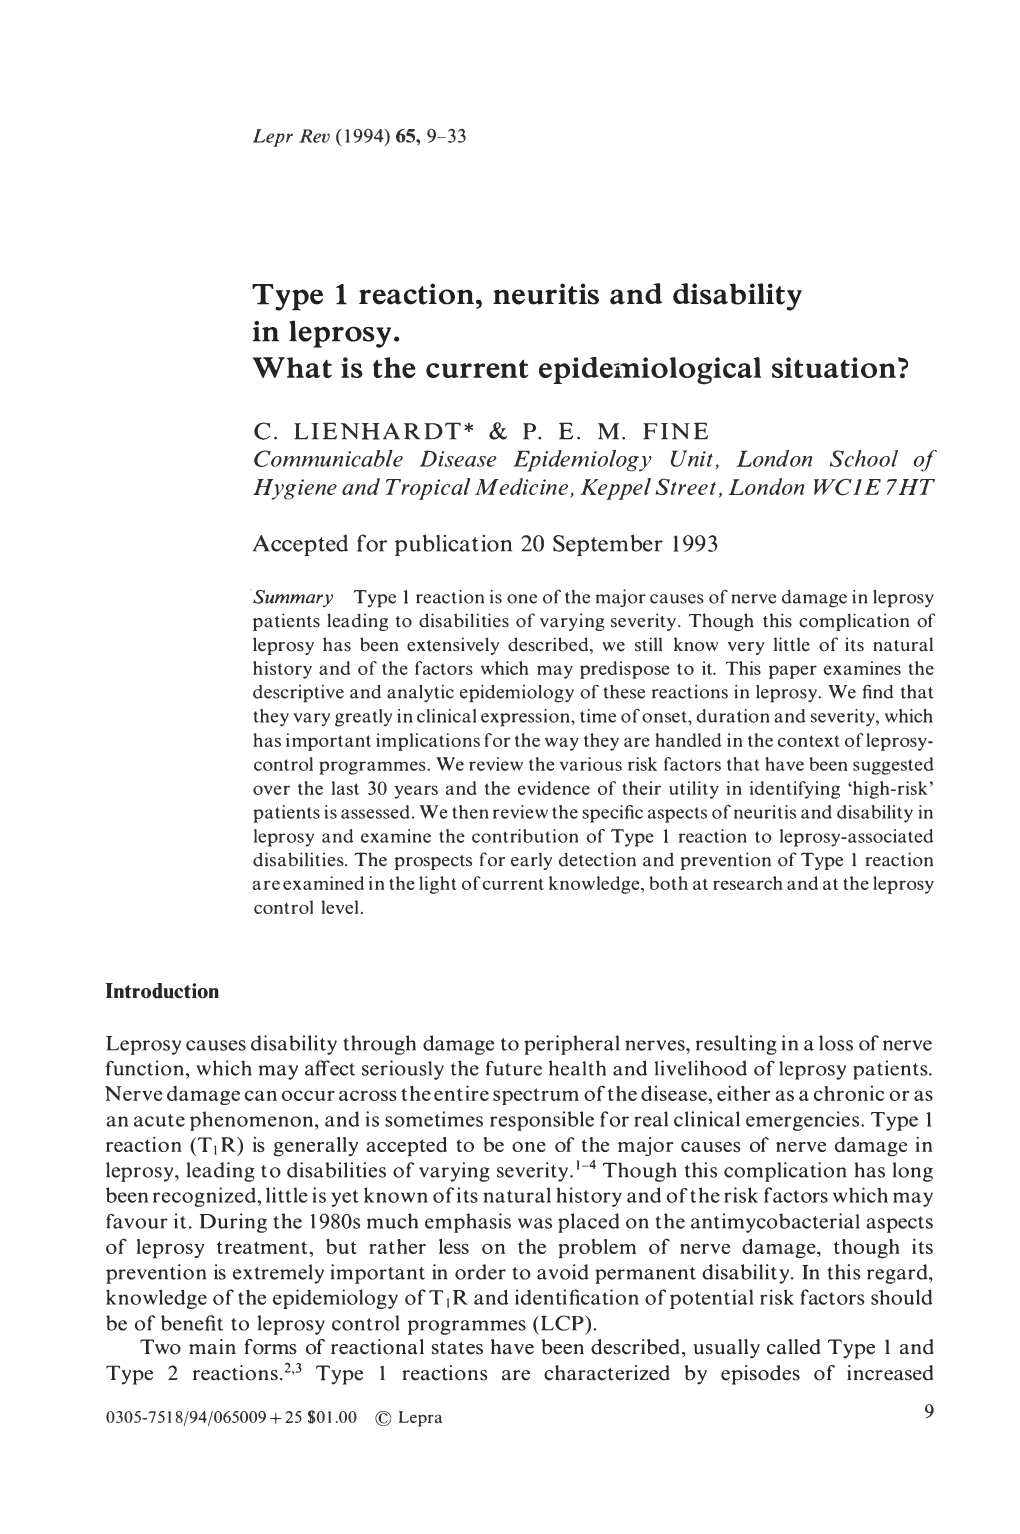 Type 1 Reaction, Neuritis and Disability in Leprosy. What Is the Current Epideiniological Situation?